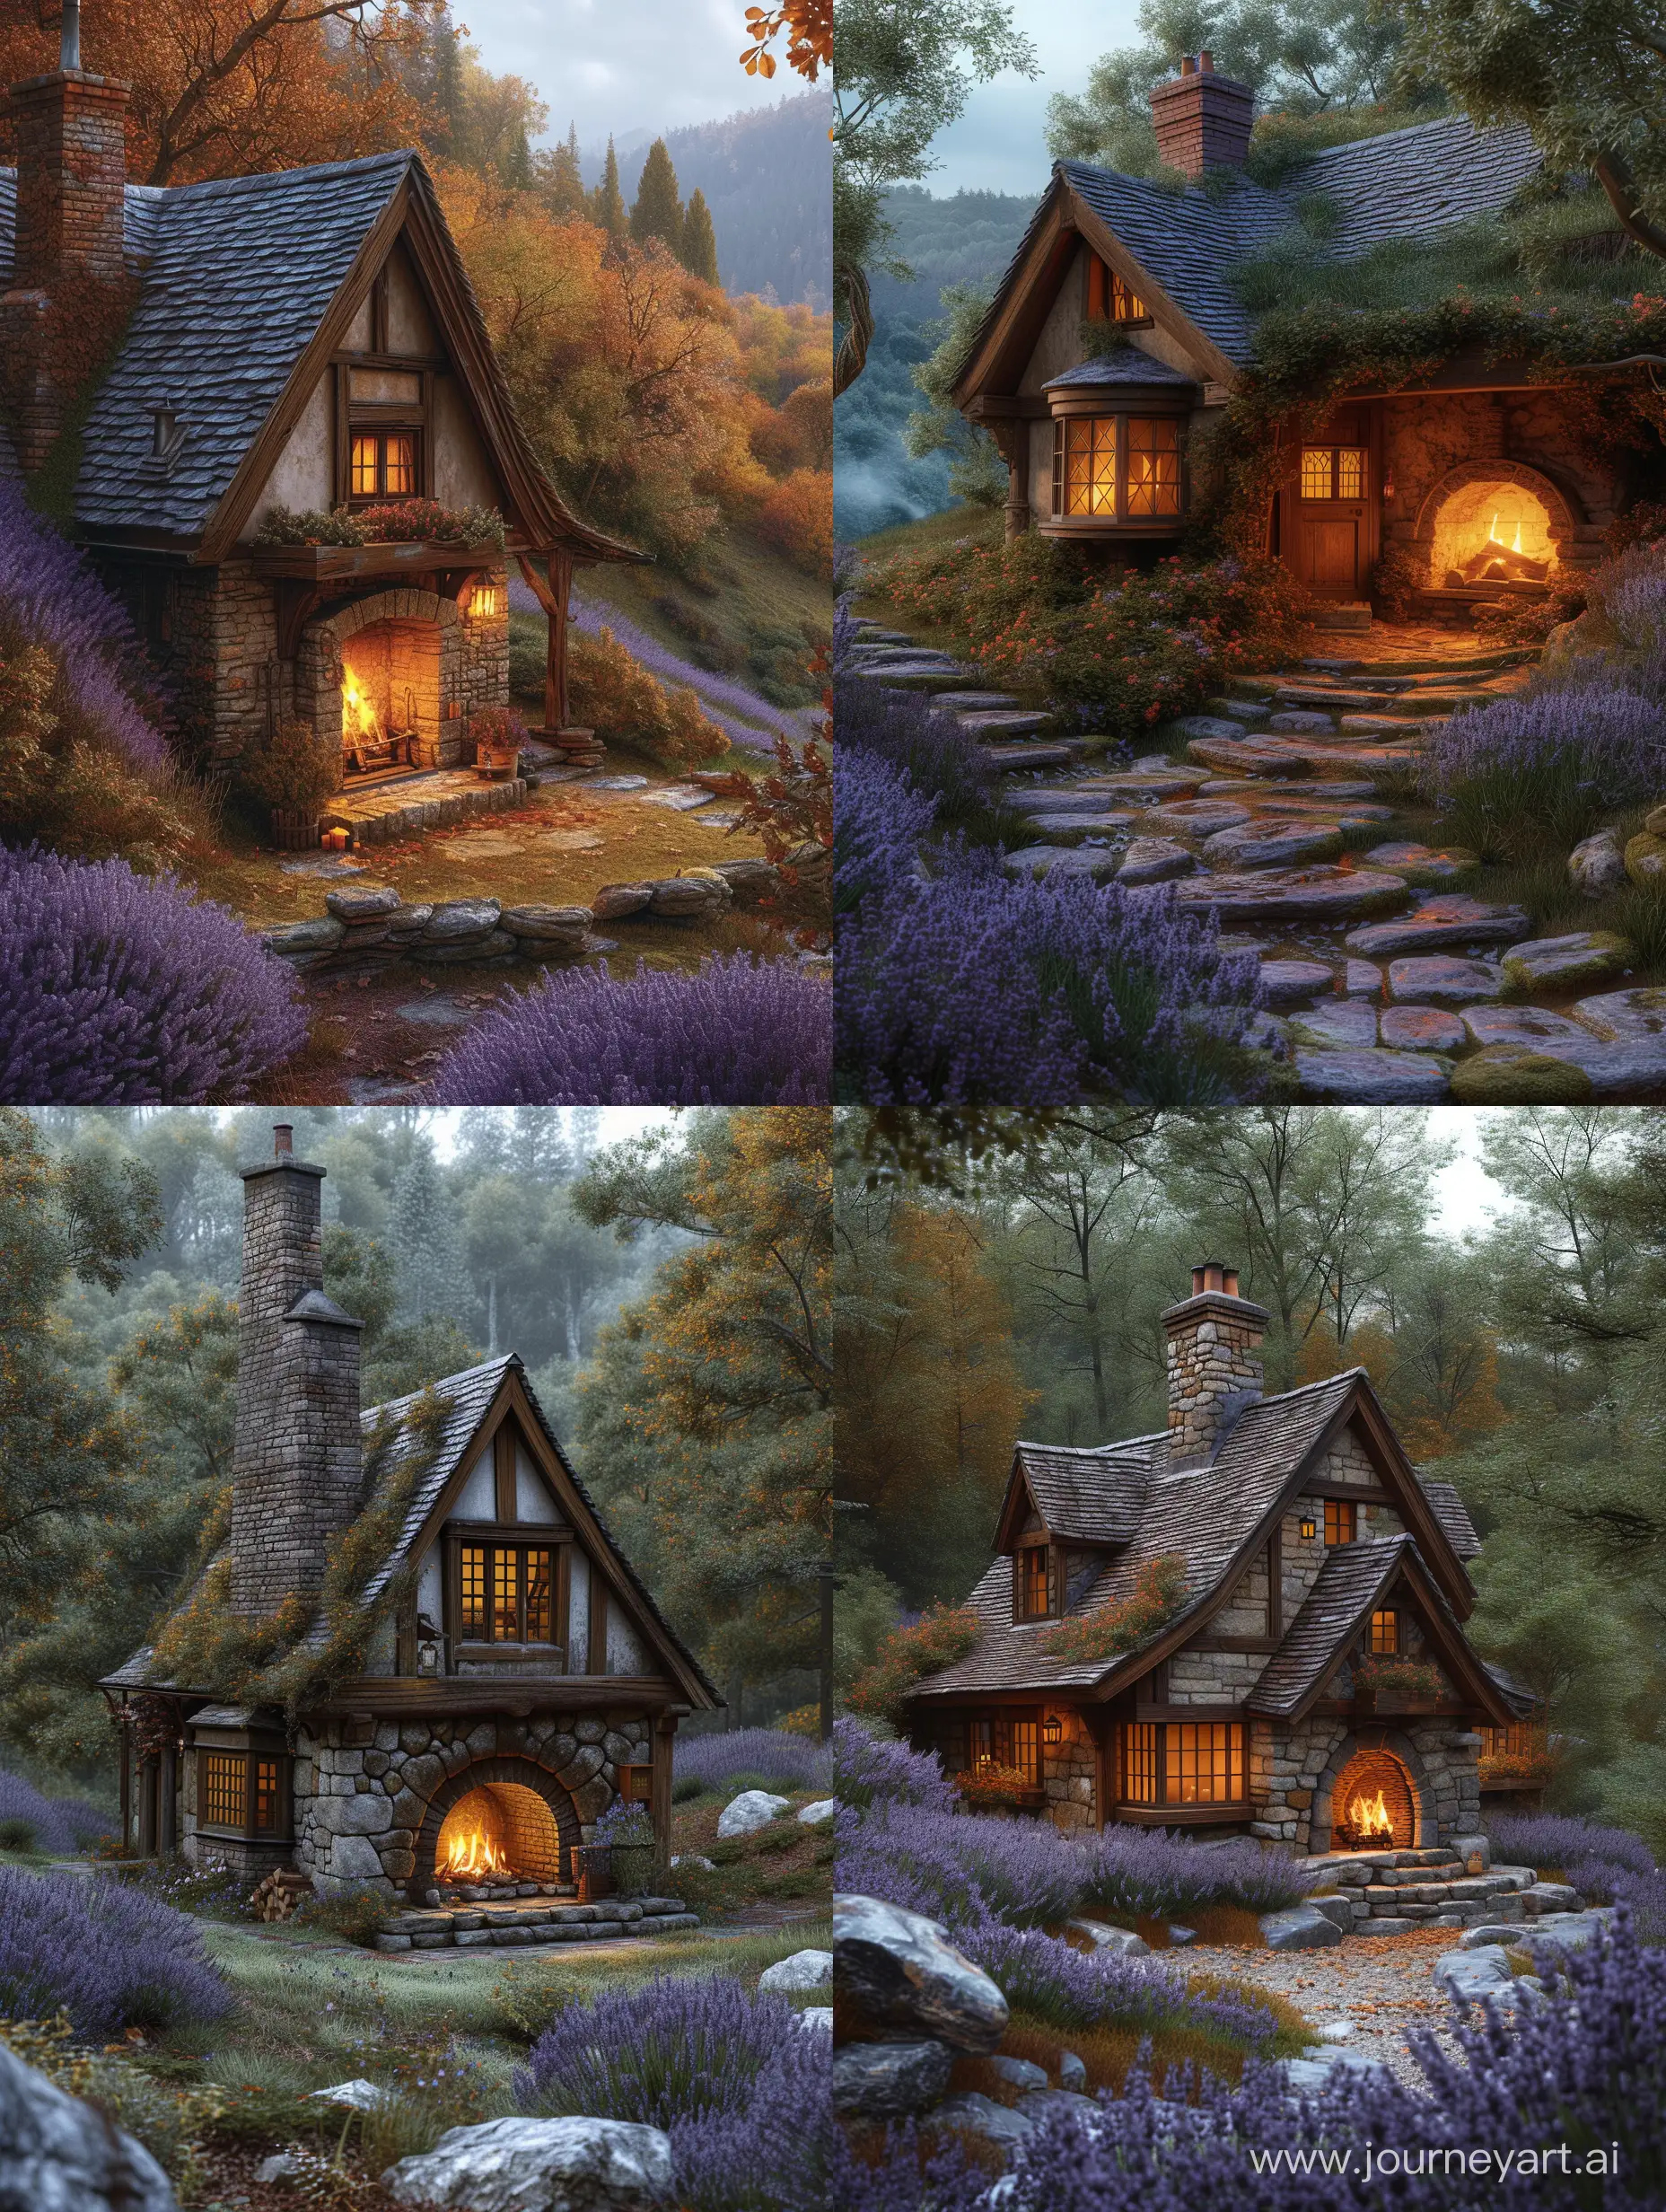 Enchanting-Wizarding-World-Cottage-Cozy-Magic-Amidst-Rolling-Hills